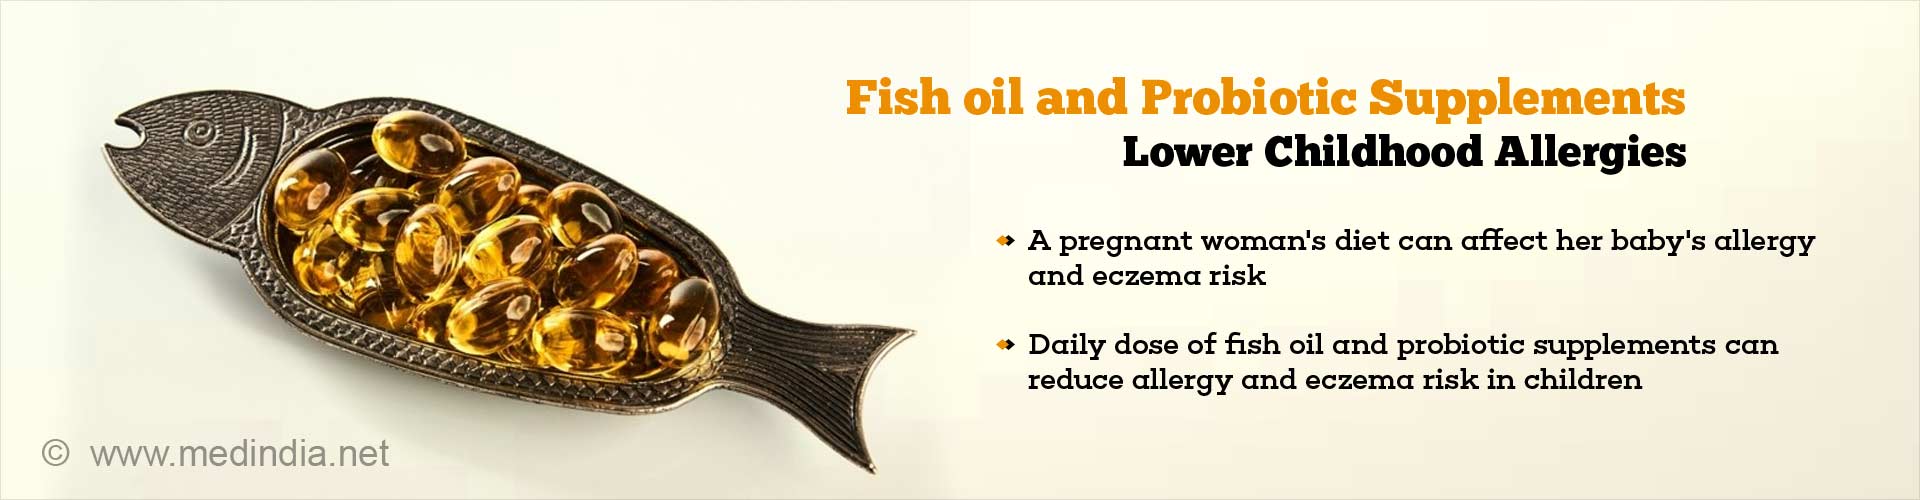 fish oil and probiotic supplements lower childhood allergies
- a pregnant woman''s diet can affect her baby''s allergy and eczema risk
- daily dose of fish oil and probiotic supplements can reduce allergy and eczema risk in children